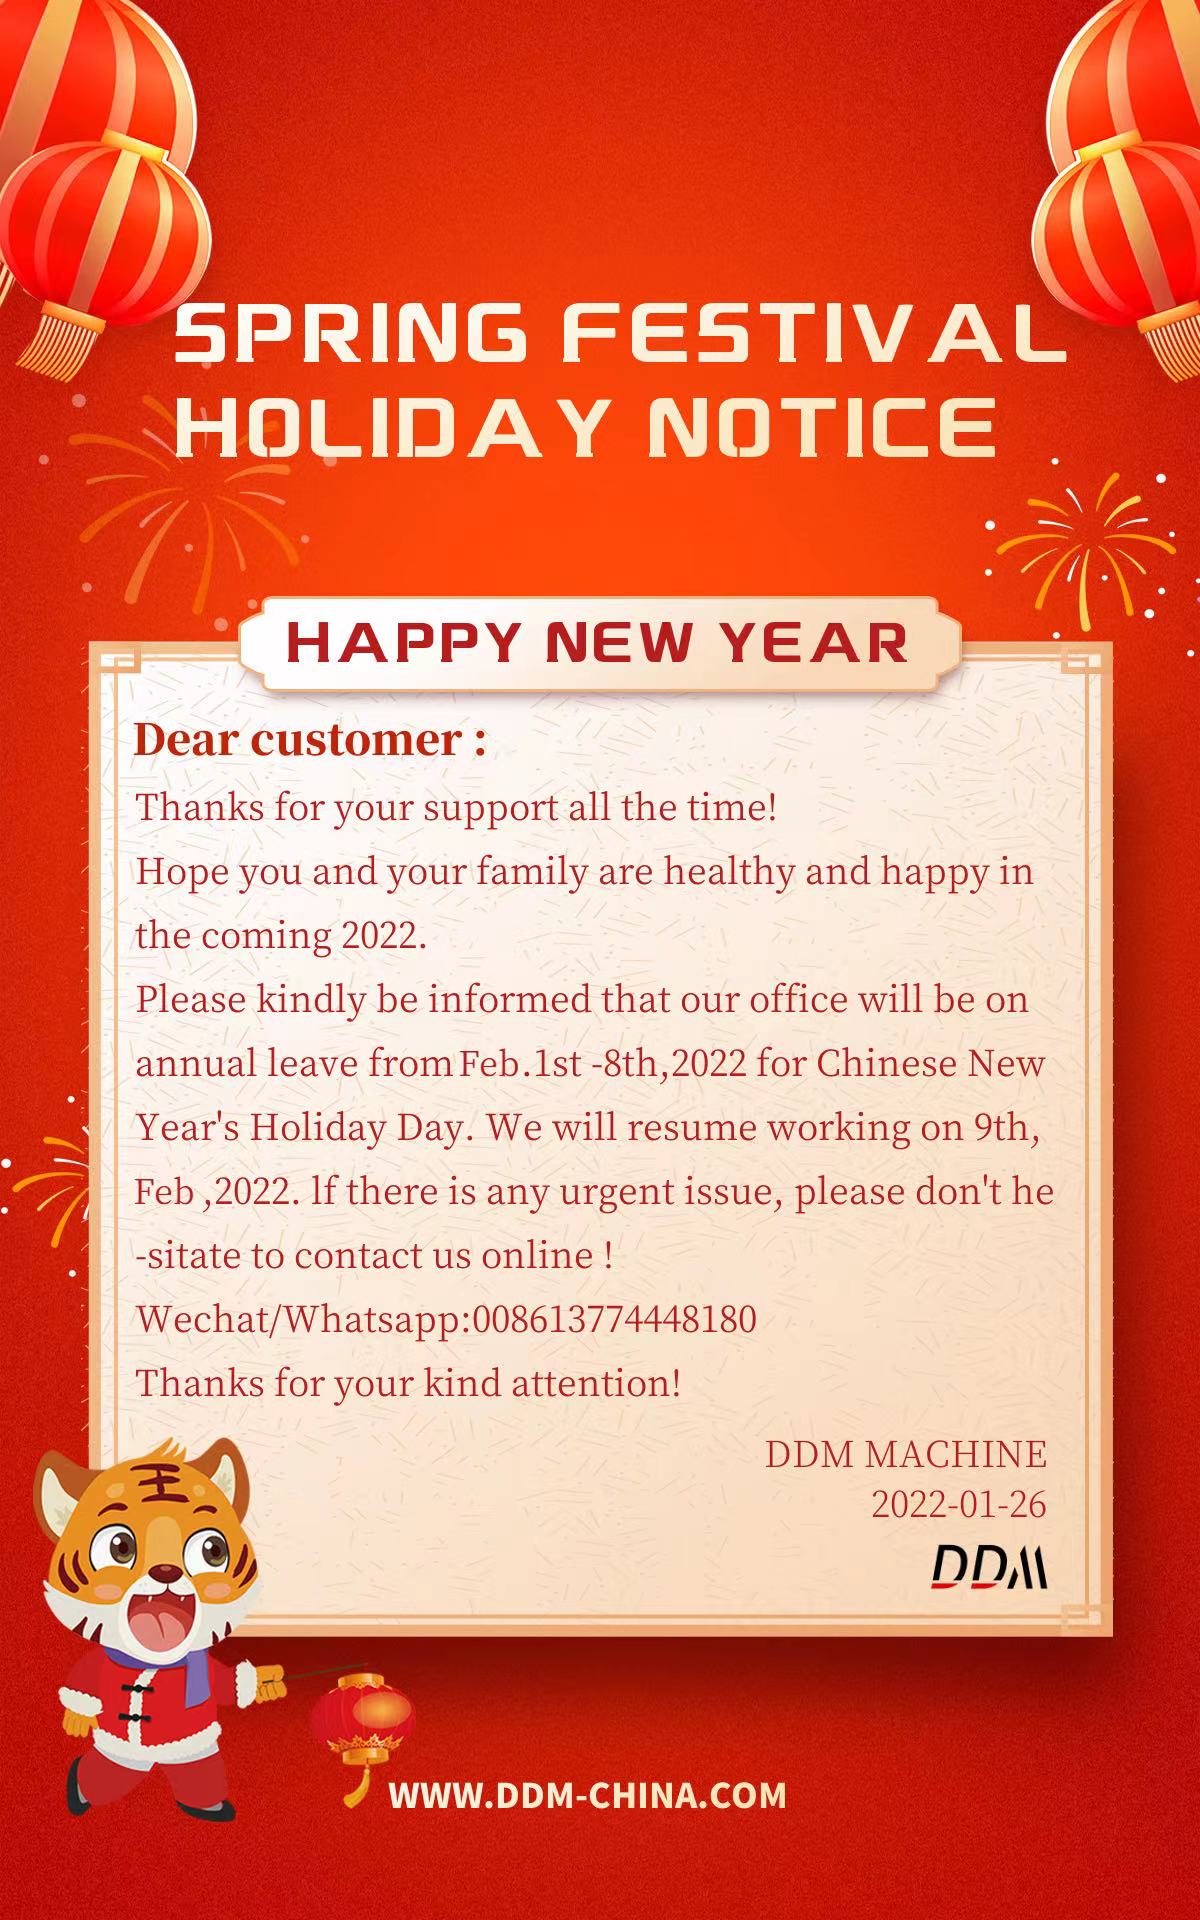 New Year Holiday Of DDMMachine 